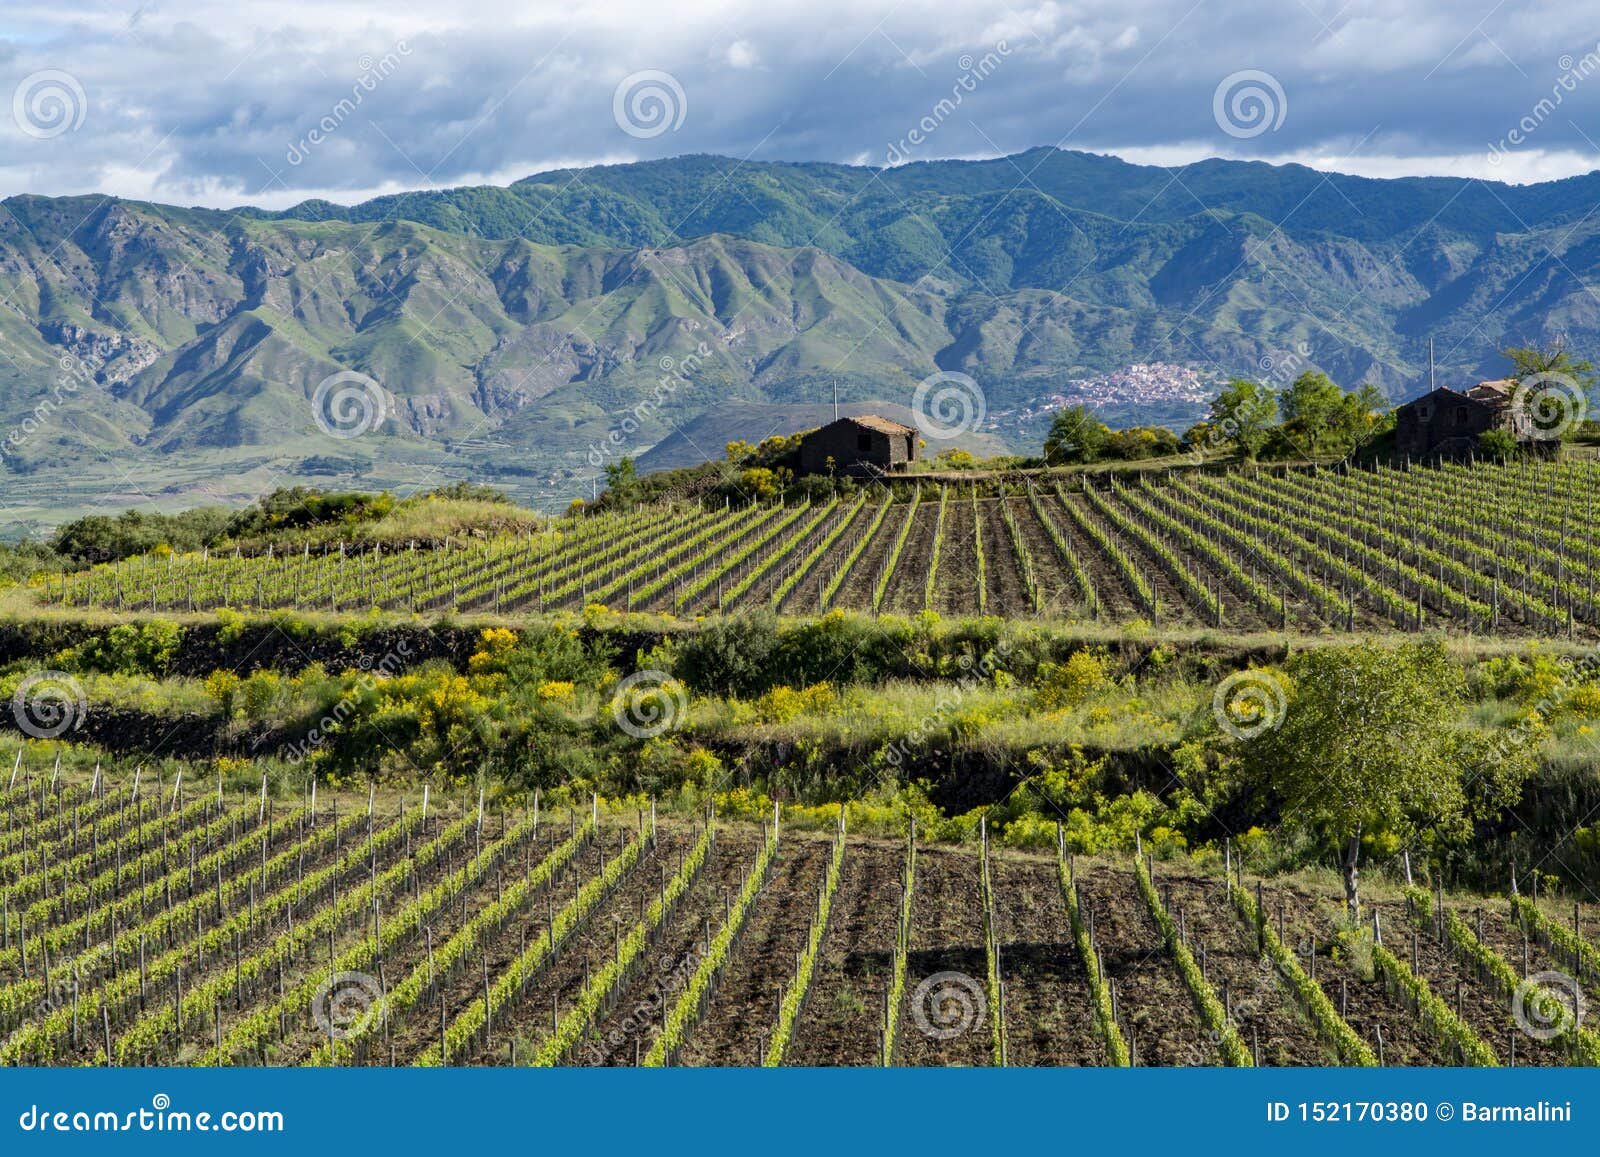 landscape with green vineyards in etna volcano region with mineral rich soil on sicily, italy